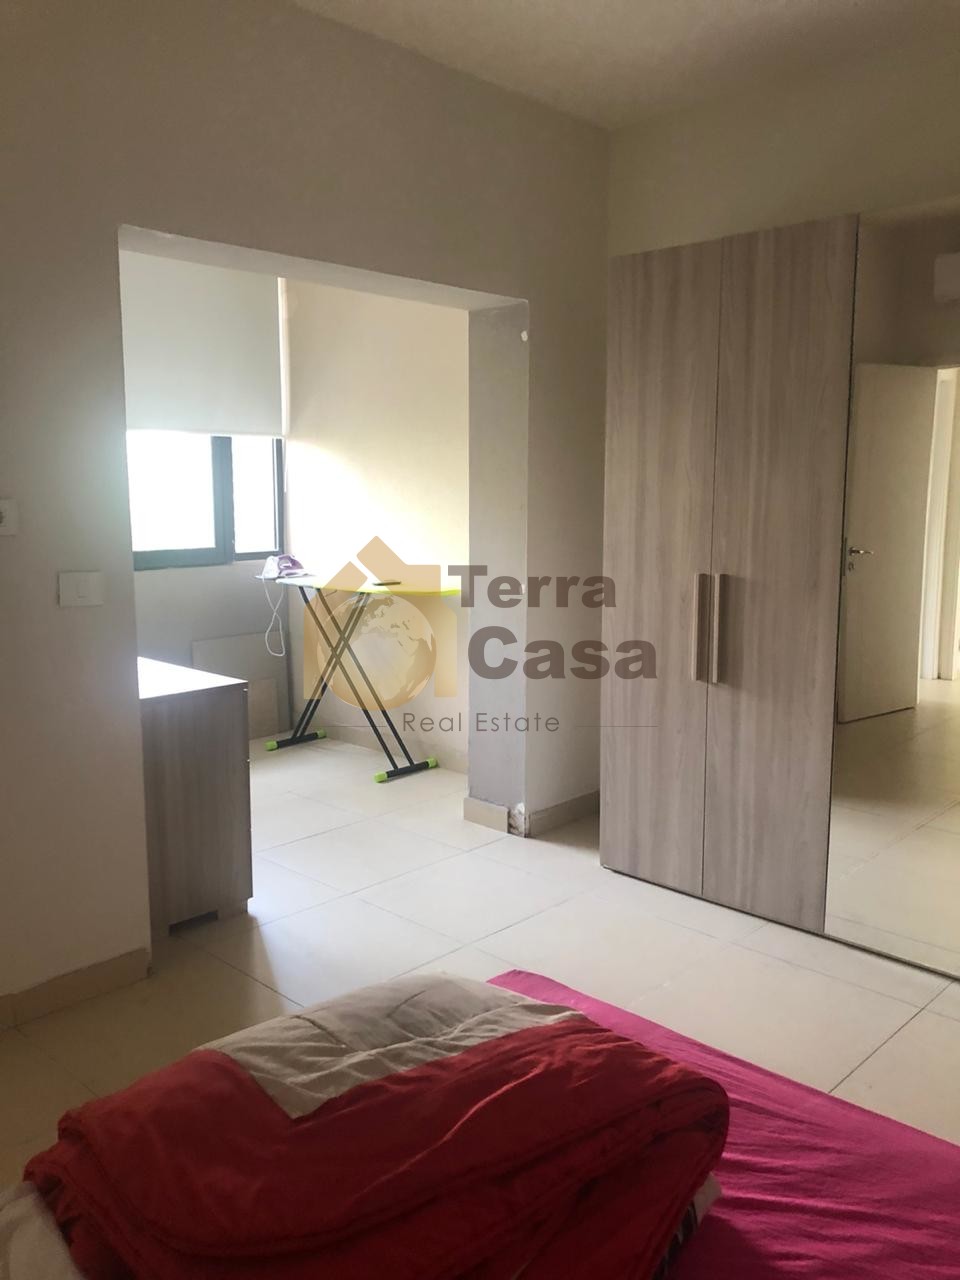 Furnished apartment prime location cash payment.Ref#1912